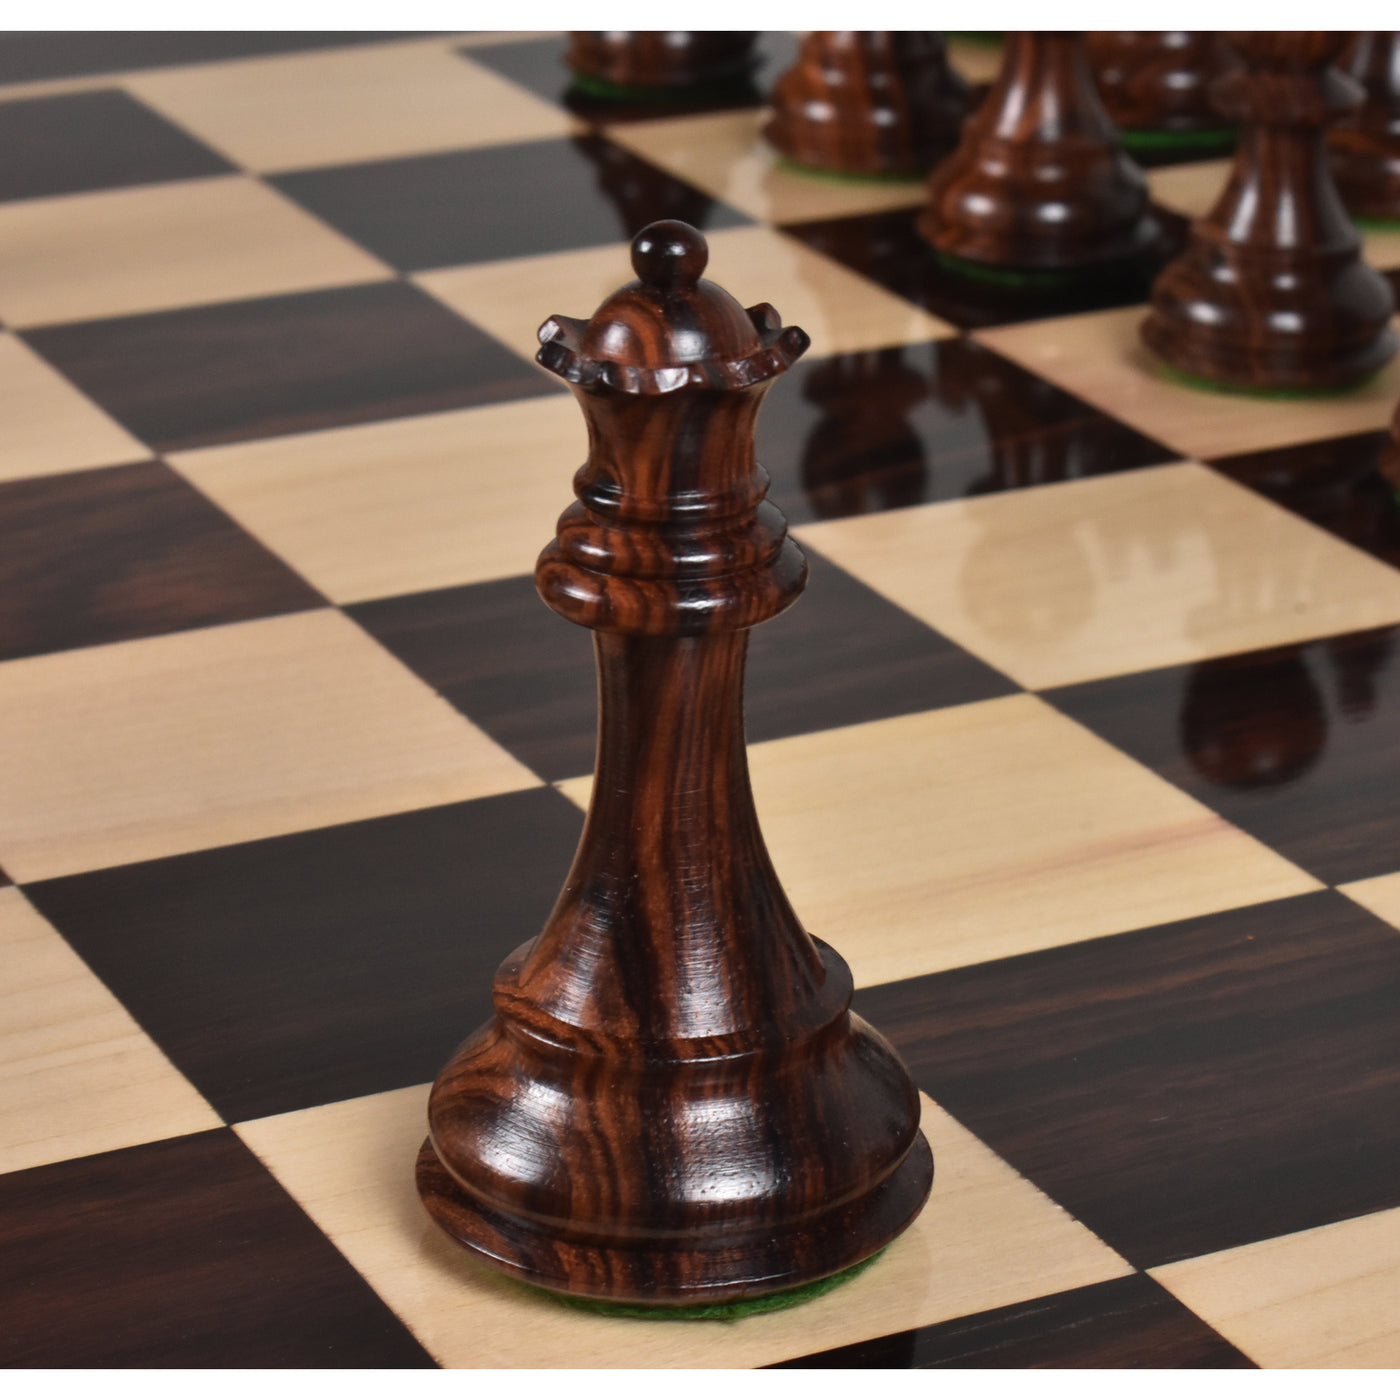 4" Fierce Knight Staunton Chess Pieces Only set - Weighted Rosewood